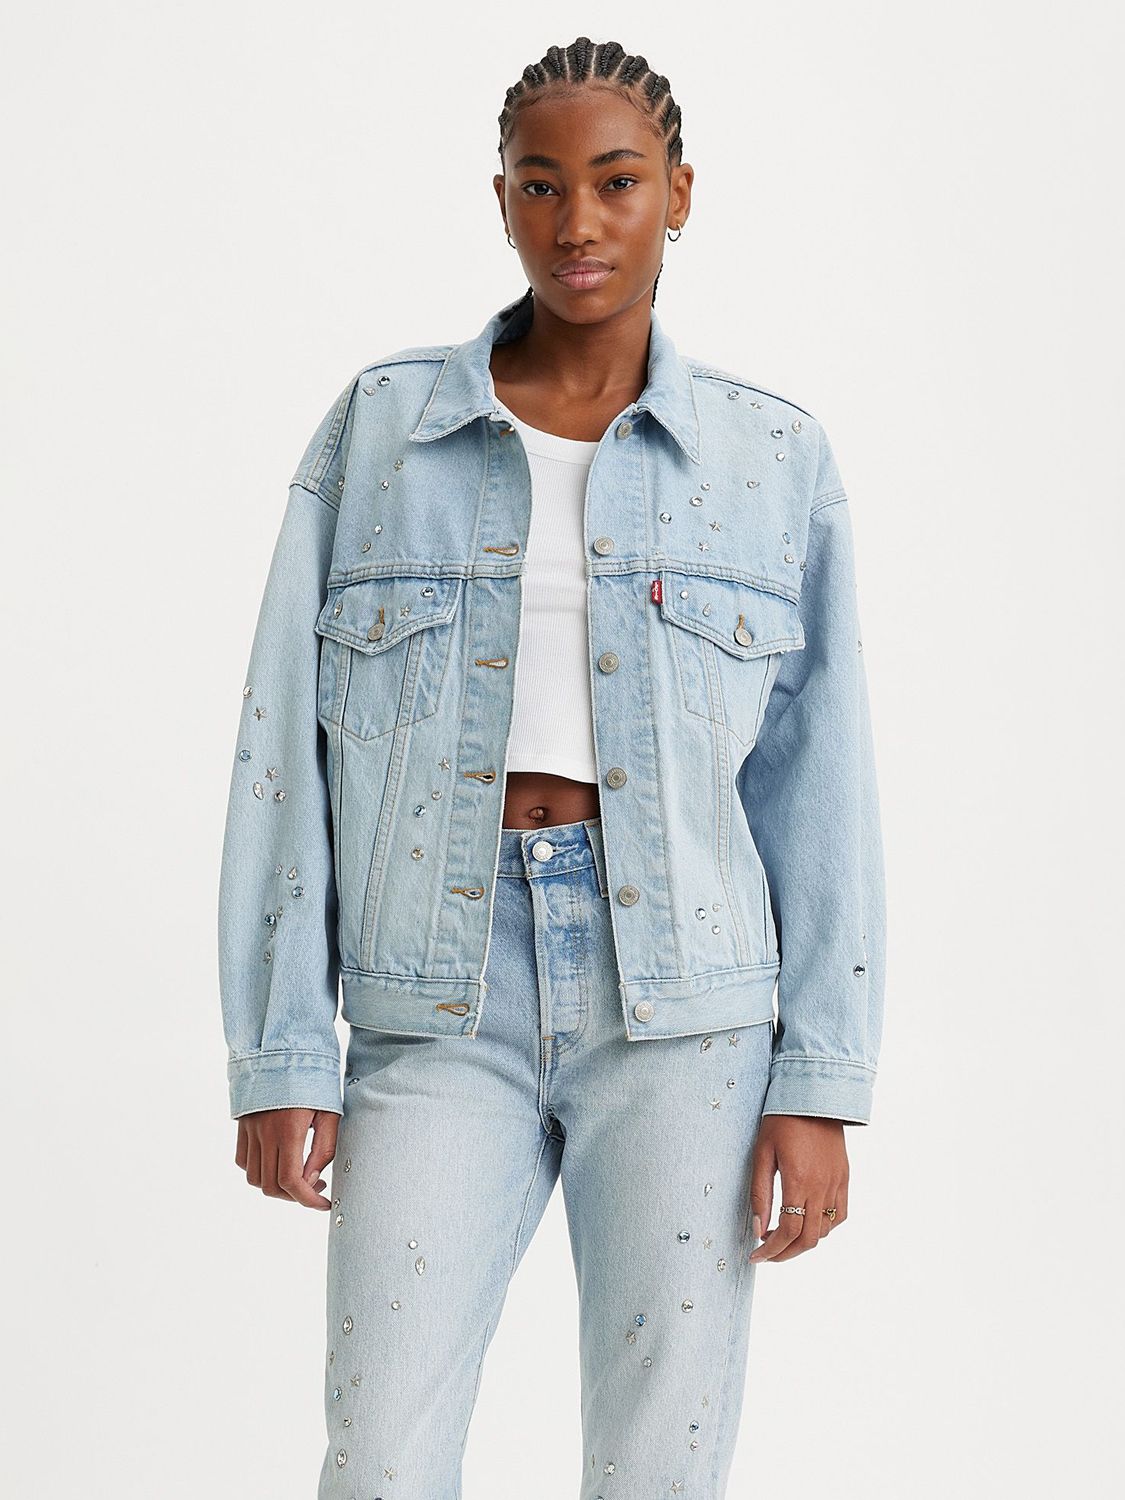 LV x YK Faces Patches Fitted Denim Jacket - Ready to Wear